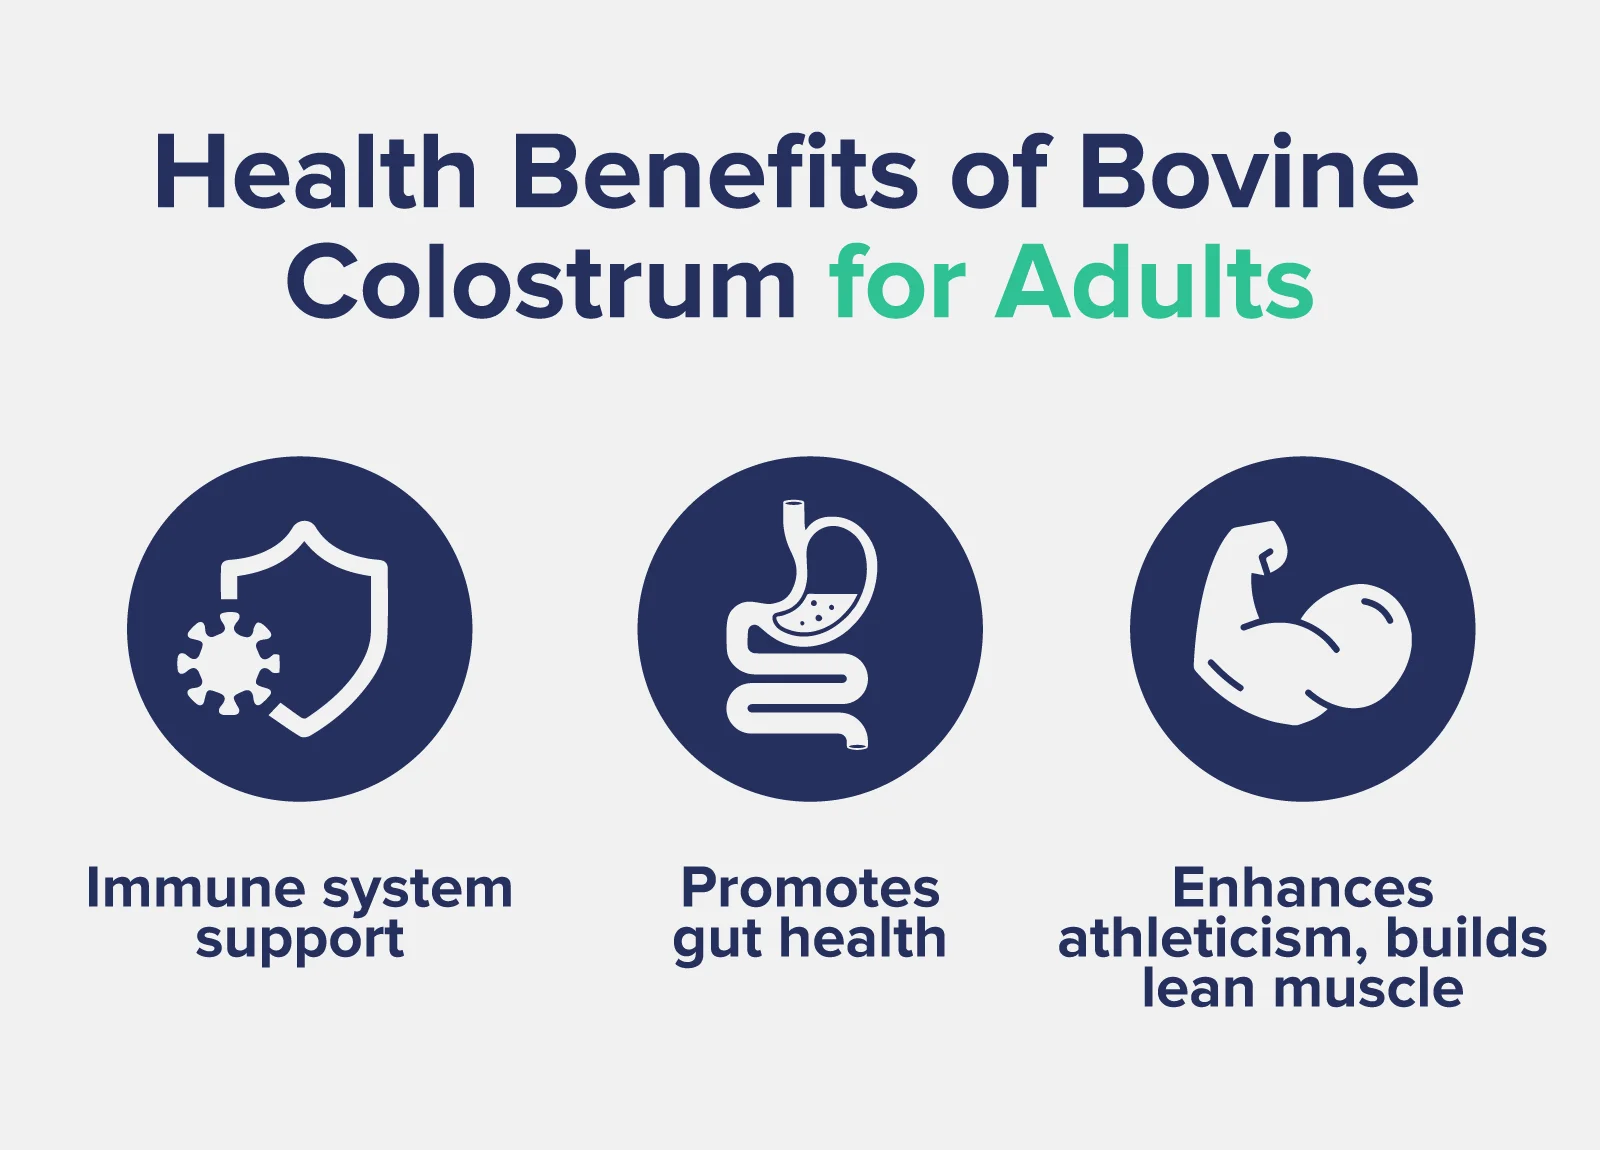 Health Benefits of Bovine Colostrum for Adults